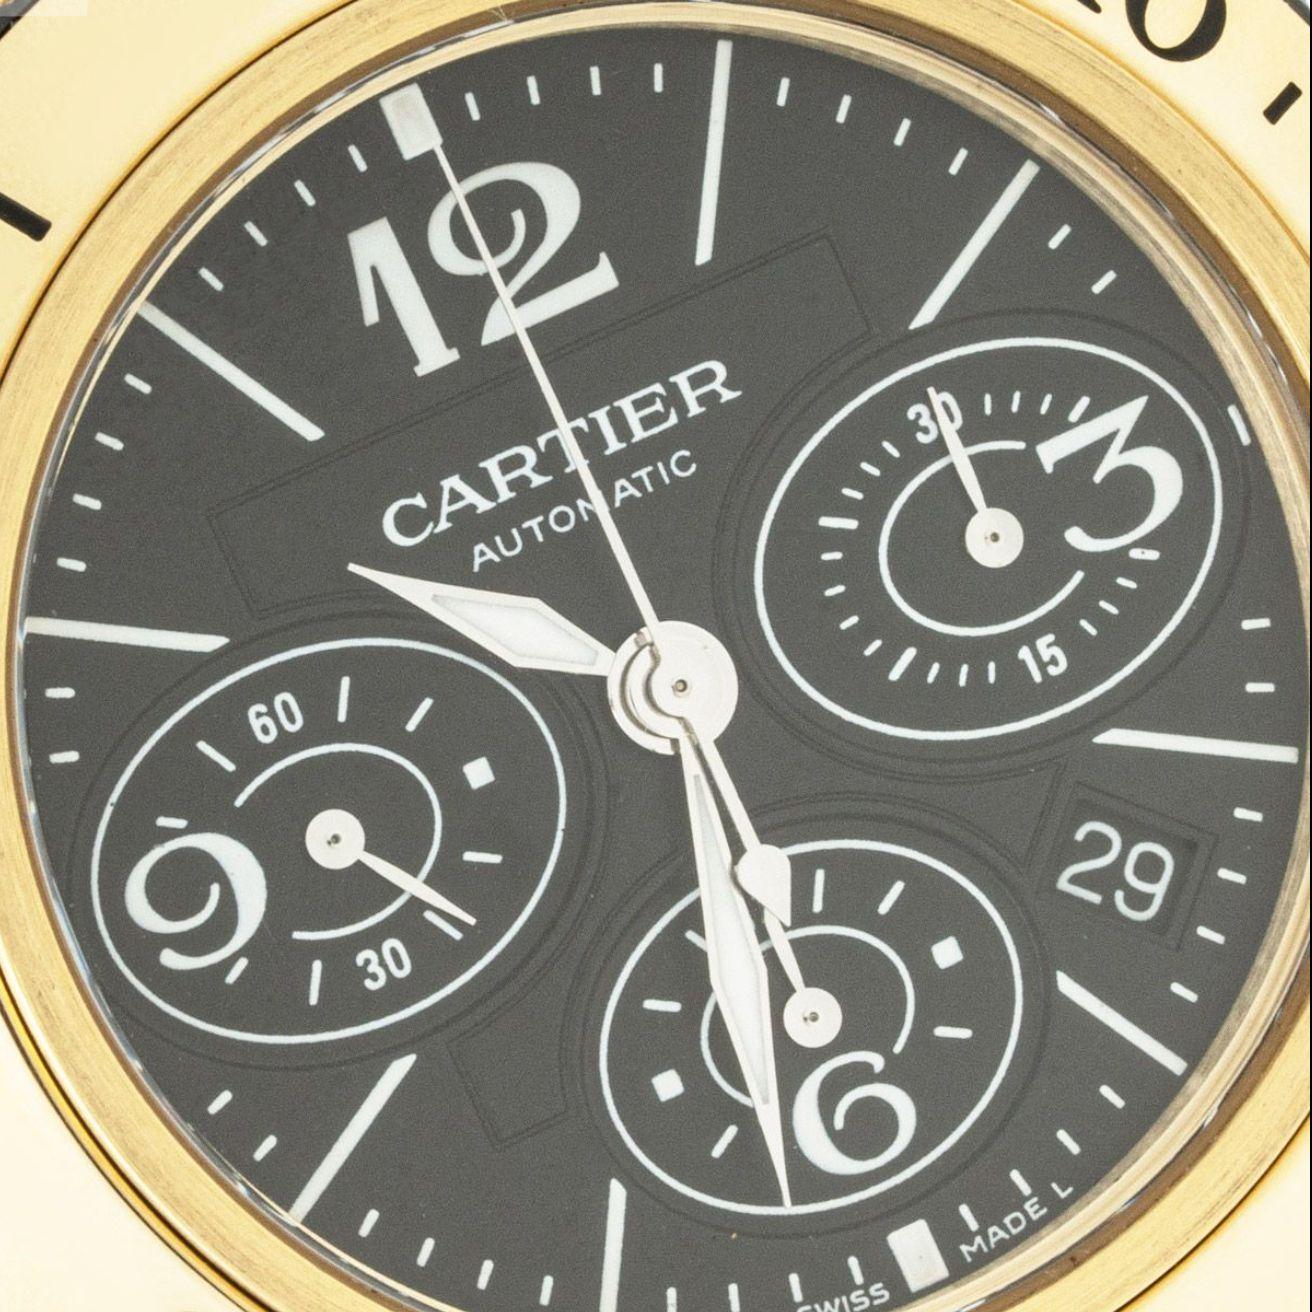 Cartier Pasha Seatimer Chronograph 3027 In Excellent Condition For Sale In London, GB